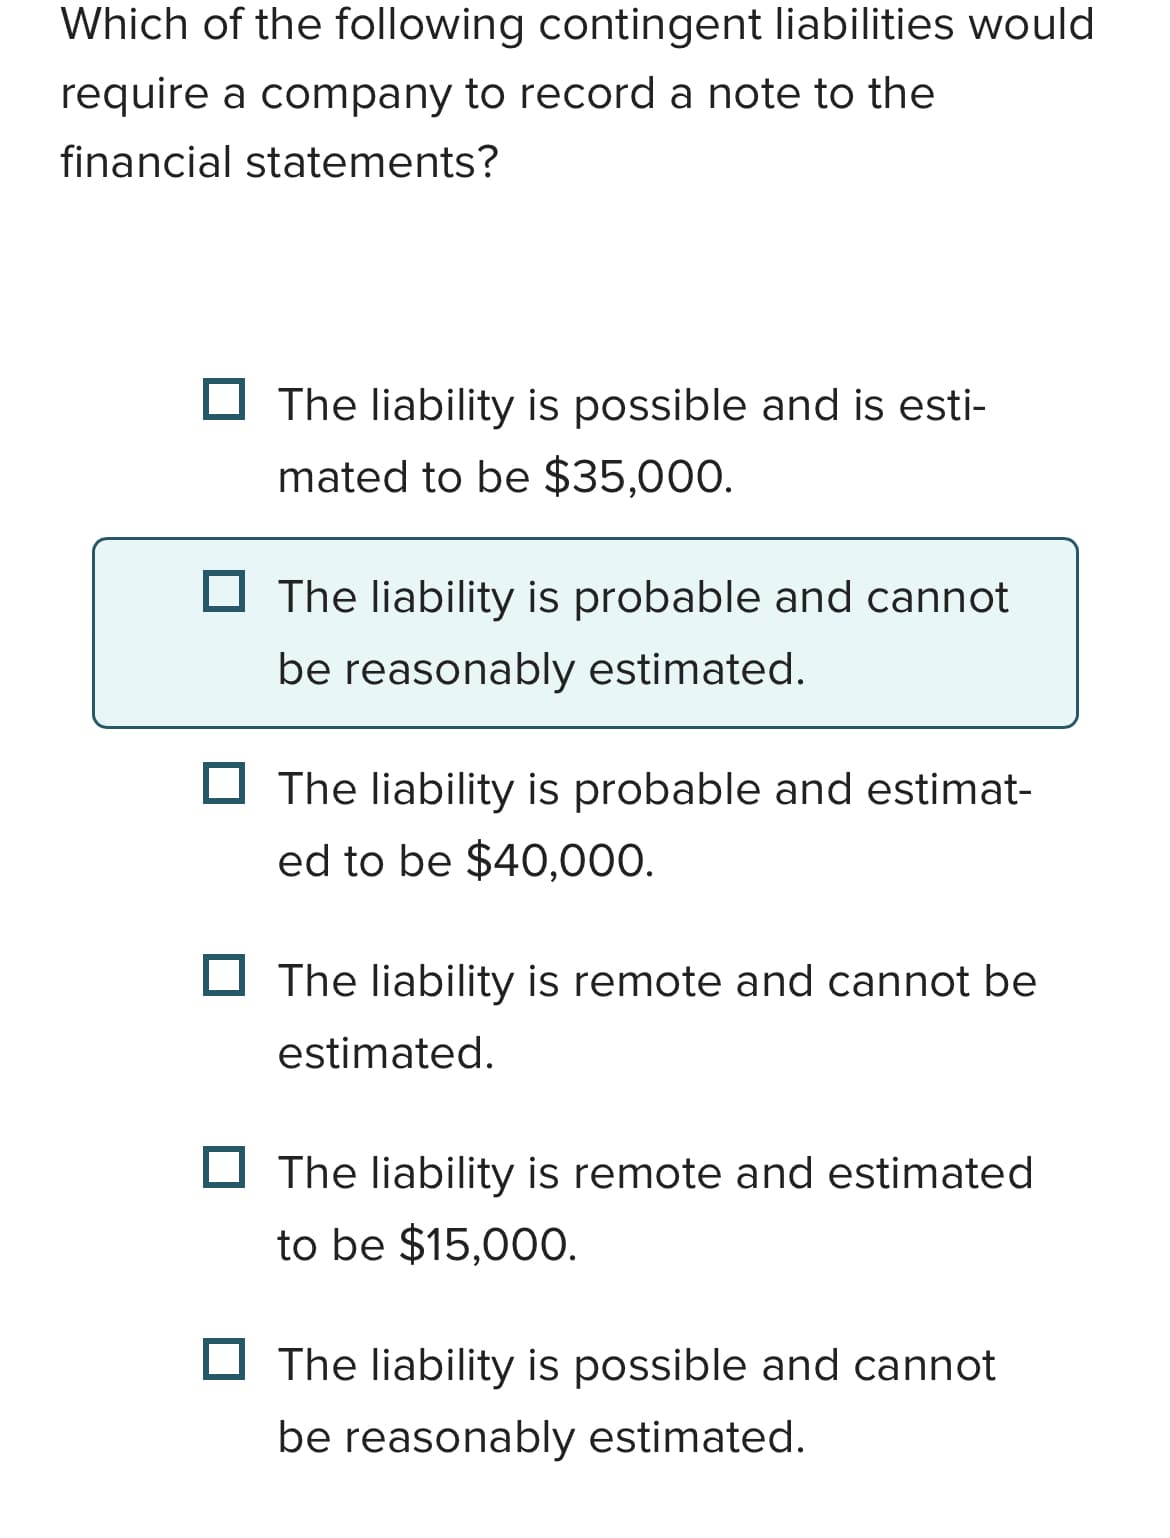 Which of the following contingent liabilities would
require a company to record a note to the
financial statements?
The liability is possible and is esti-
mated to be $35,000.
The liability is probable and cannot
be reasonably estimated.
The liability is probable and estimat-
ed to be $40,000.
The liability is remote and cannot be
estimated.
The liability is remote and estimated
to be $15,000.
The liability is possible and cannot
be reasonably estimated.